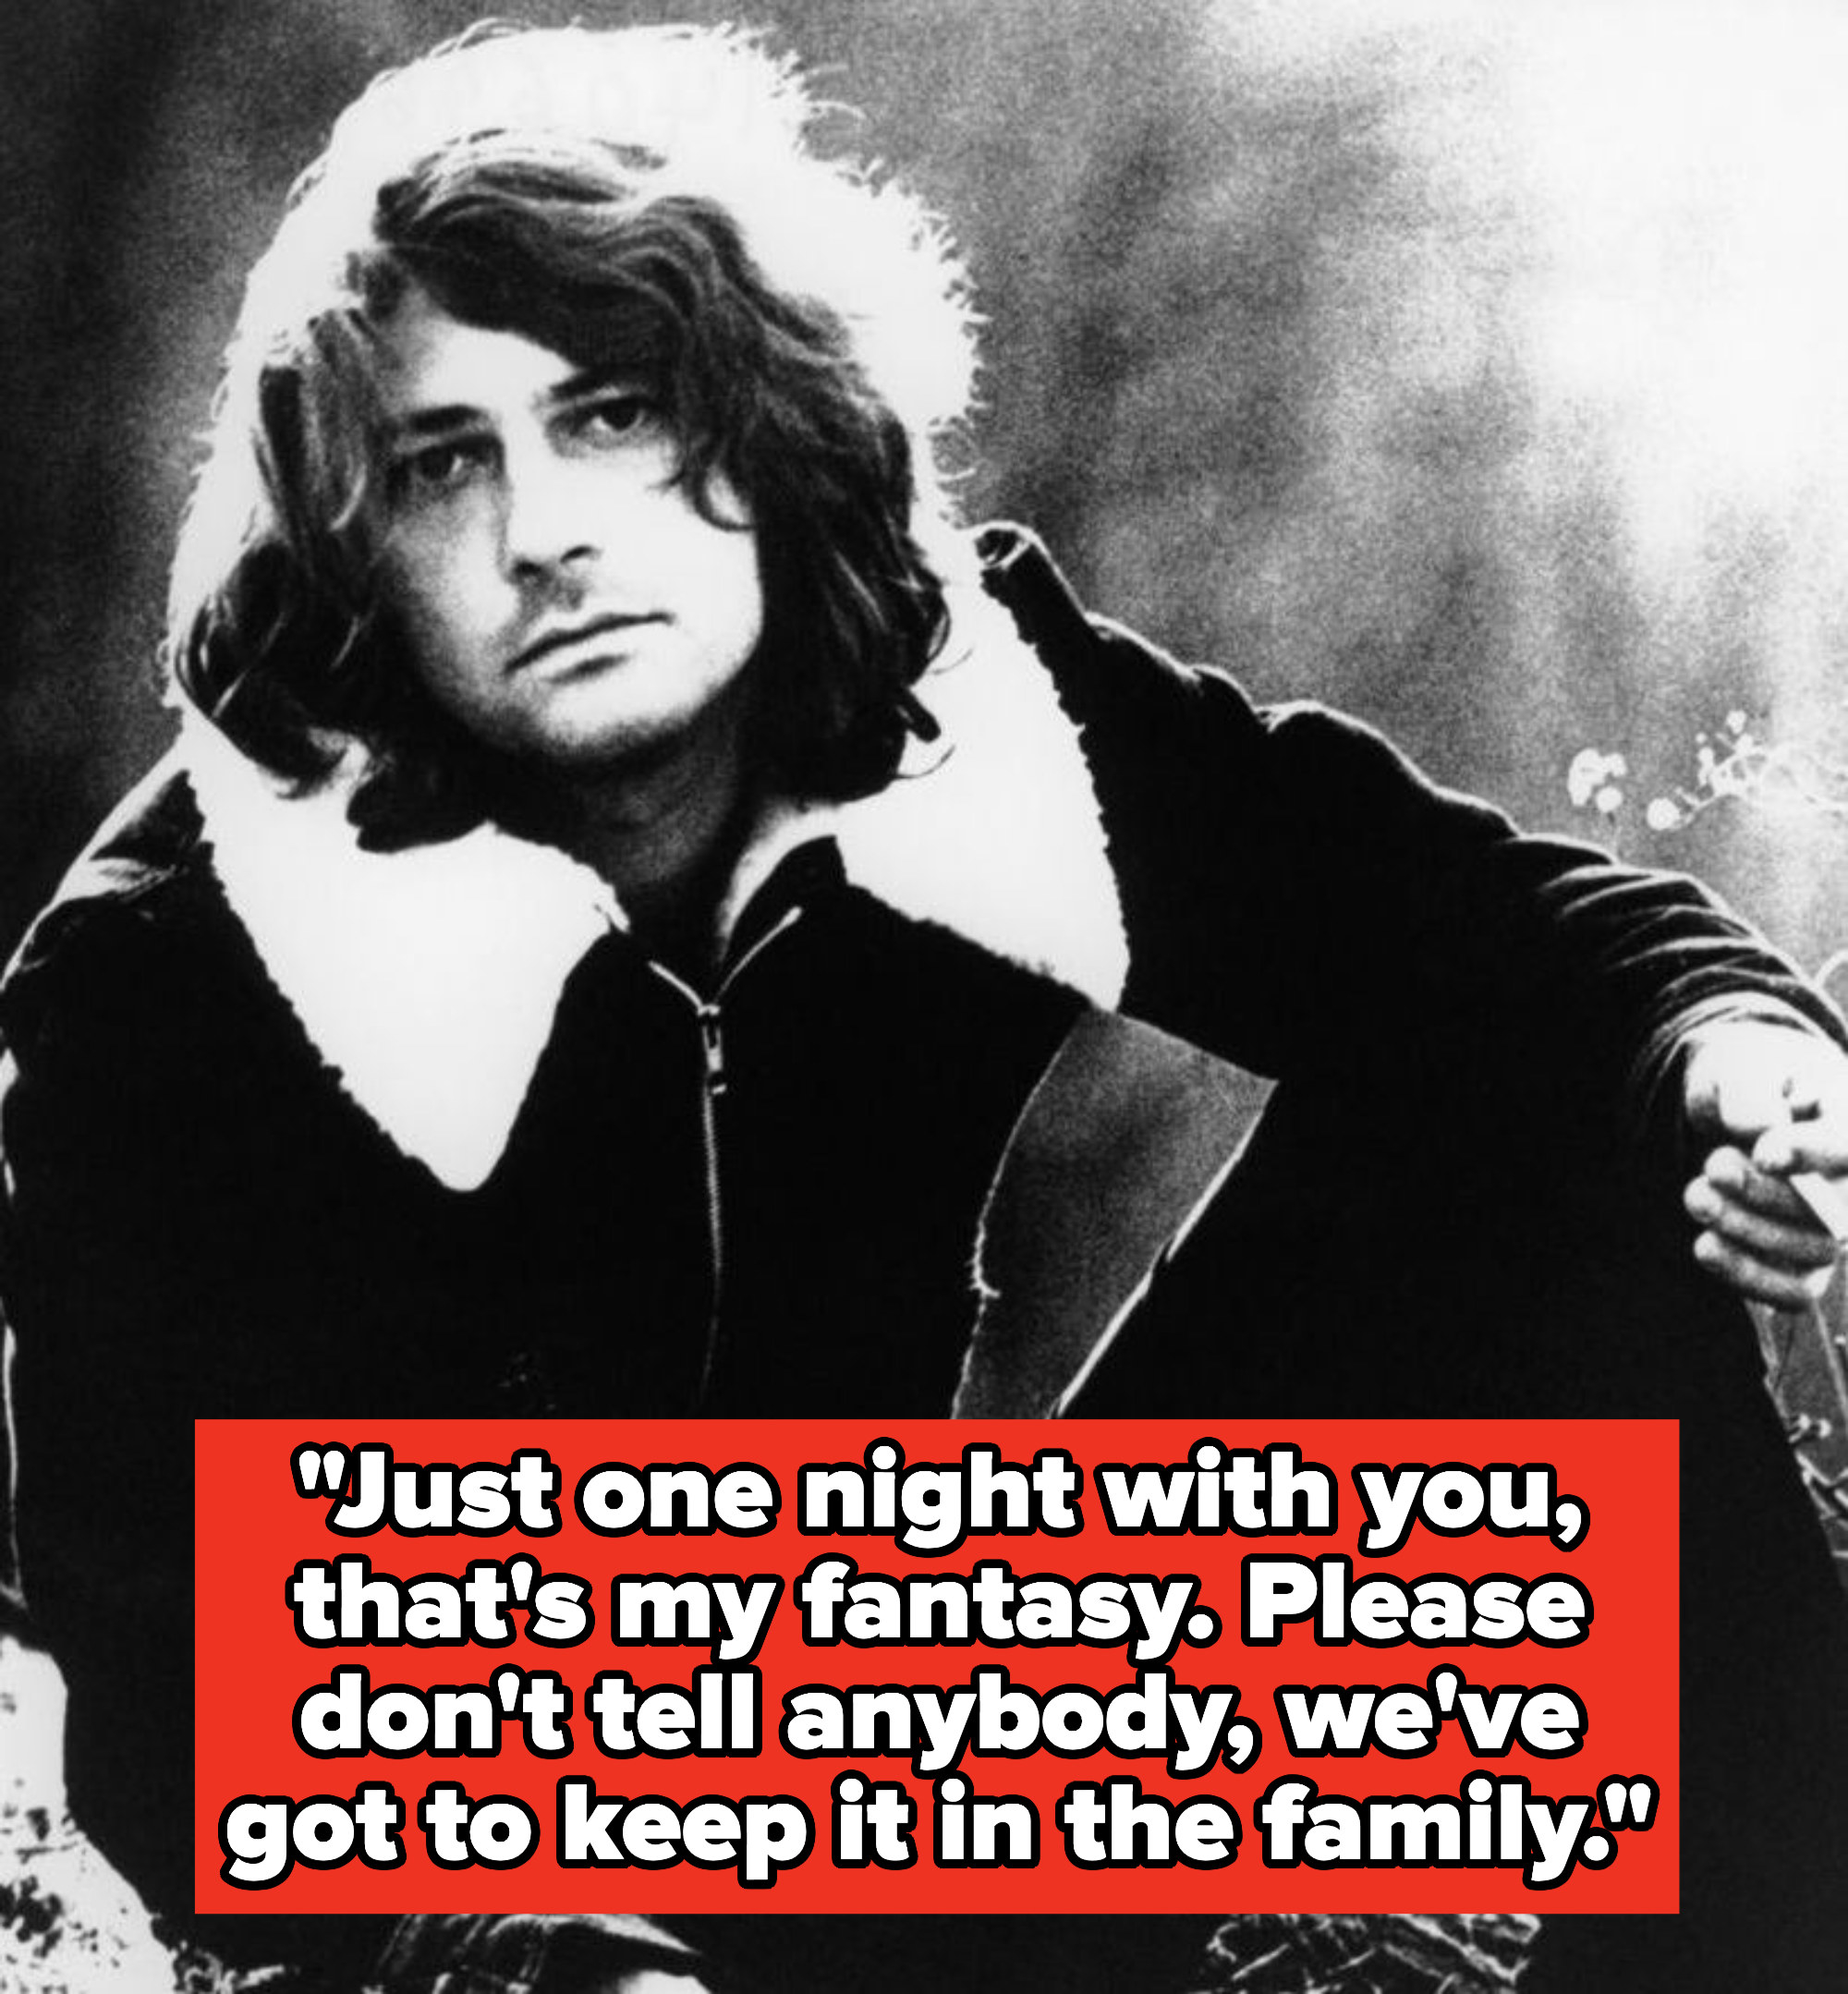 Deodato lyrics: &quot;Just one night with you, that&#x27;s my fantasy. Please don&#x27;t tell anybody, we&#x27;ve got to keep it in the family&quot;